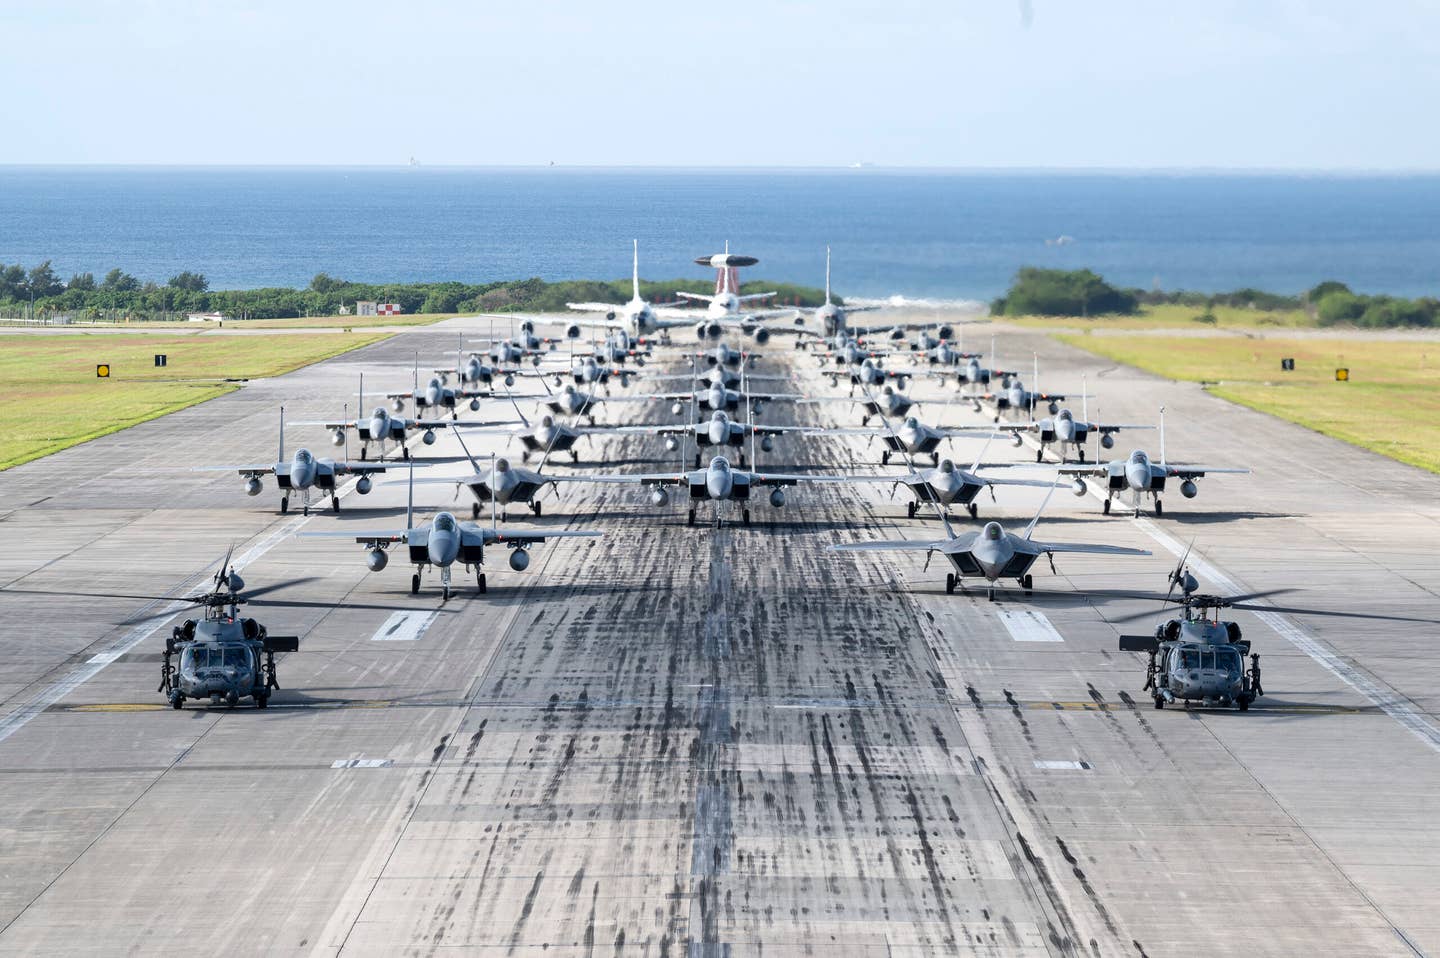 U.S. Air Force aircraft line up on the runway during a capabilities demonstration at Kadena Air Base, Japan, Nov. 22, 2022. These F-15s are all being sent to other units or retired. (U.S. Air Force photo by Senior Airman Jessi Roth)